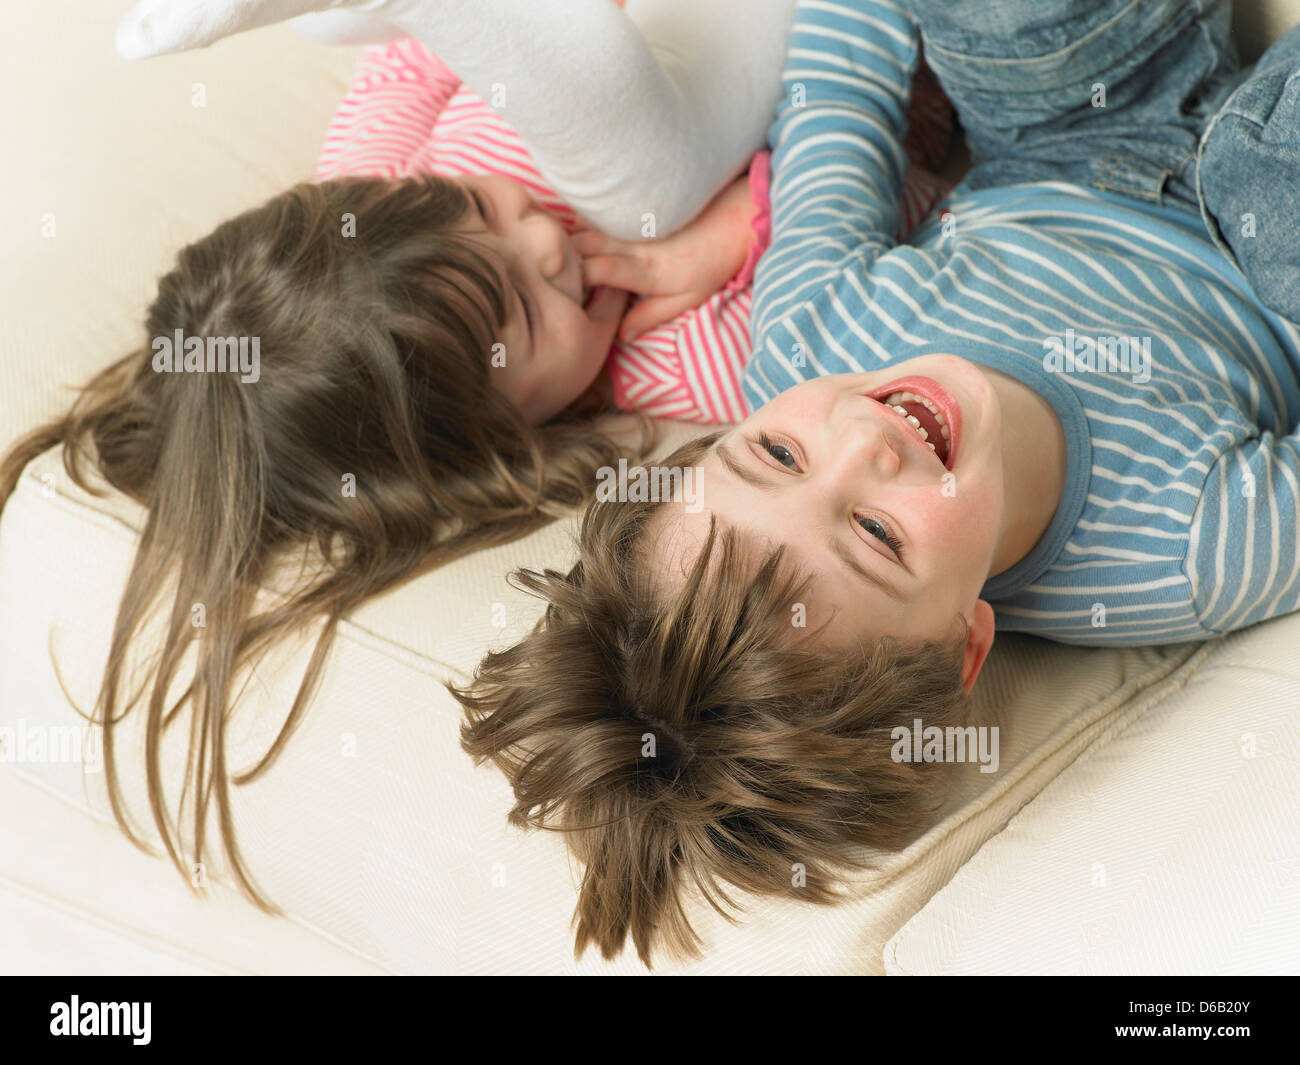 Children playing on sofa together Stock Photo